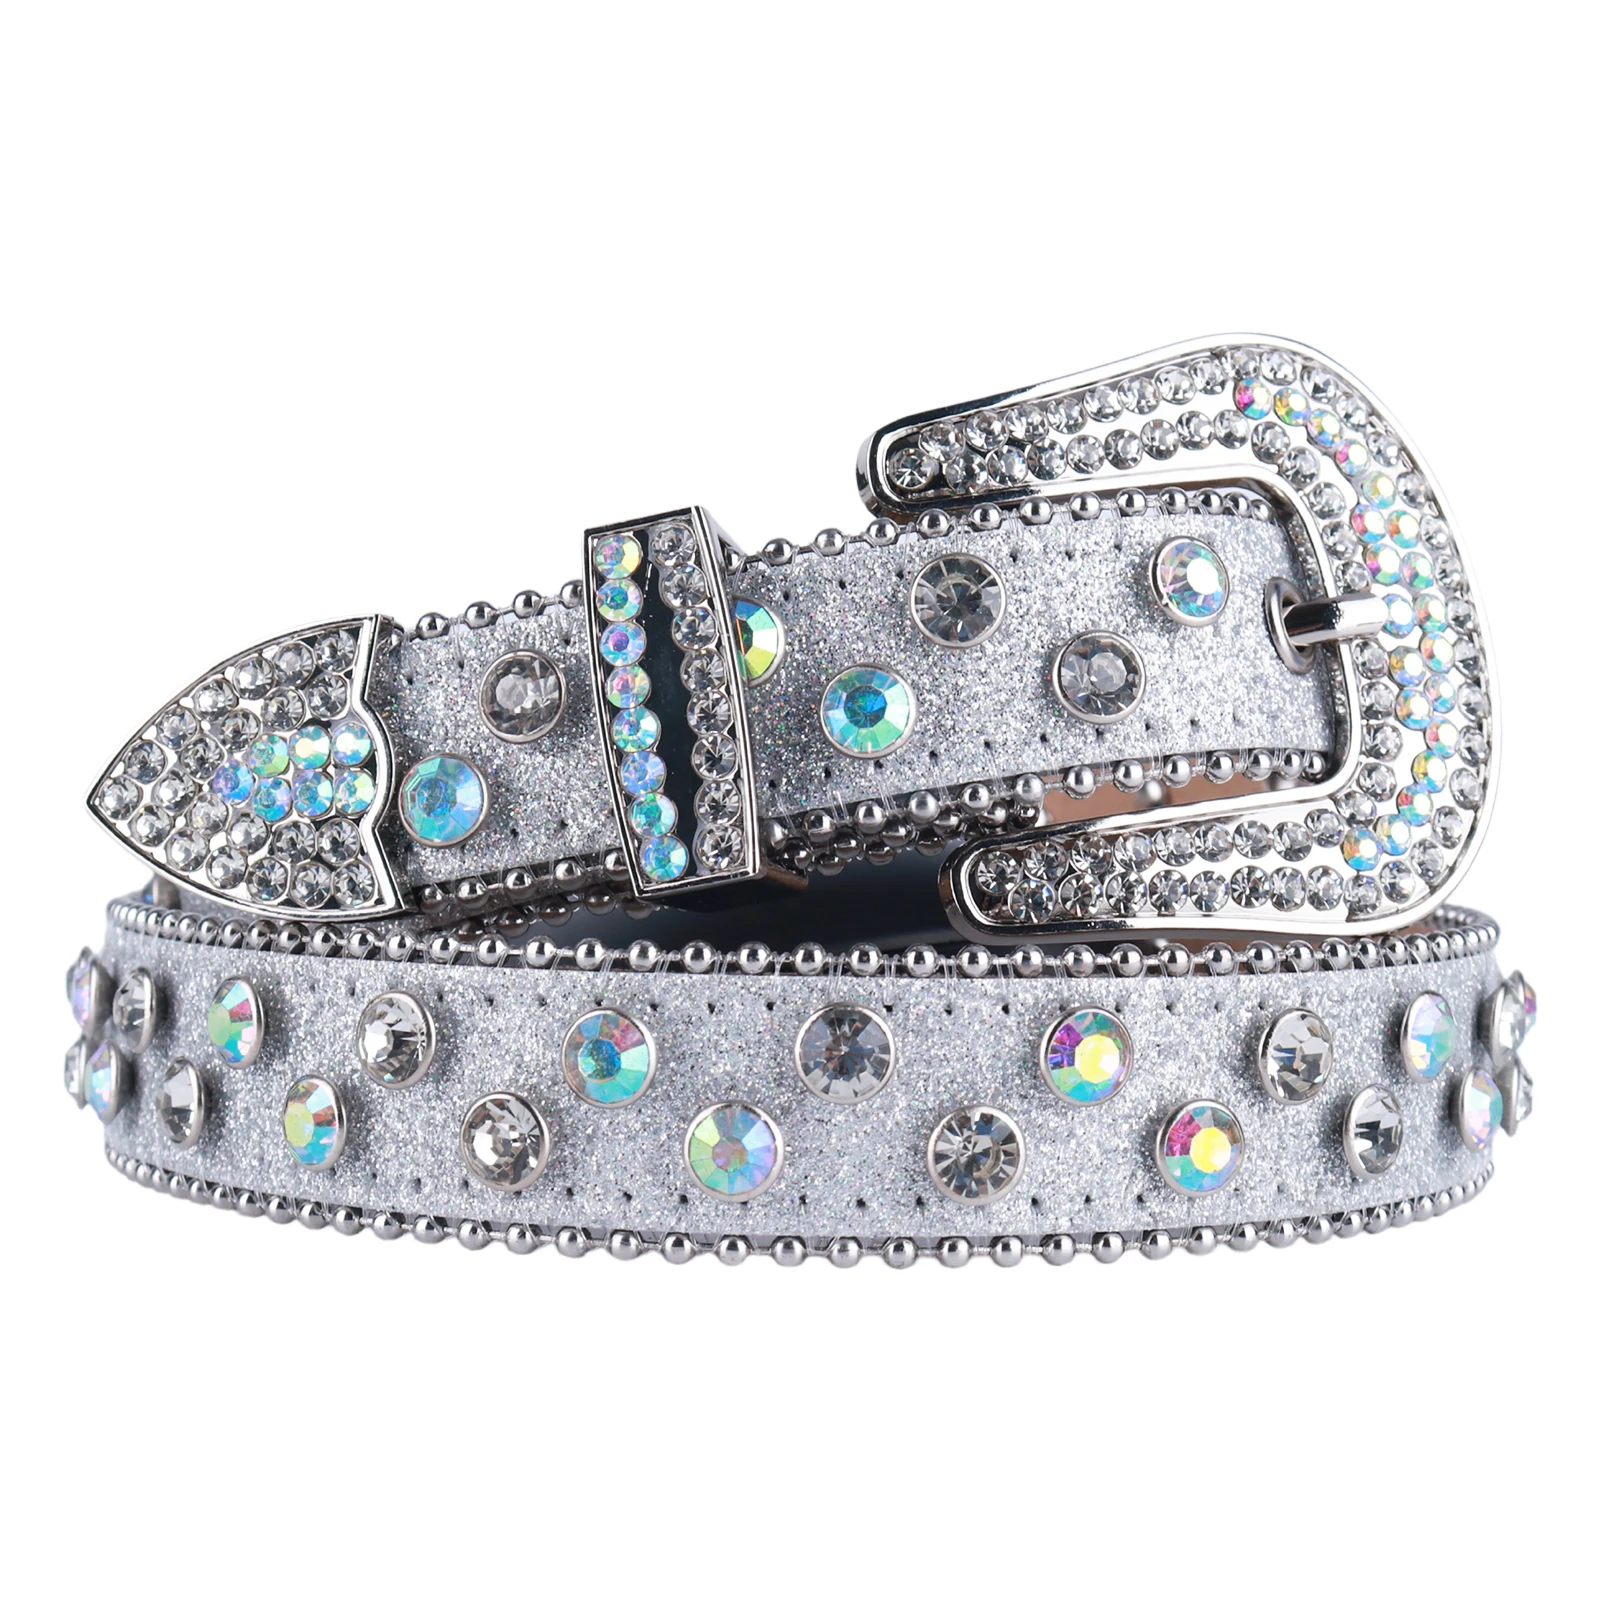 Bling Bling High Quality Western Punk Cowboy Cowgirl Rhinestones Belts For Women Man  Diamond Crystal Studded Belt For Jeans